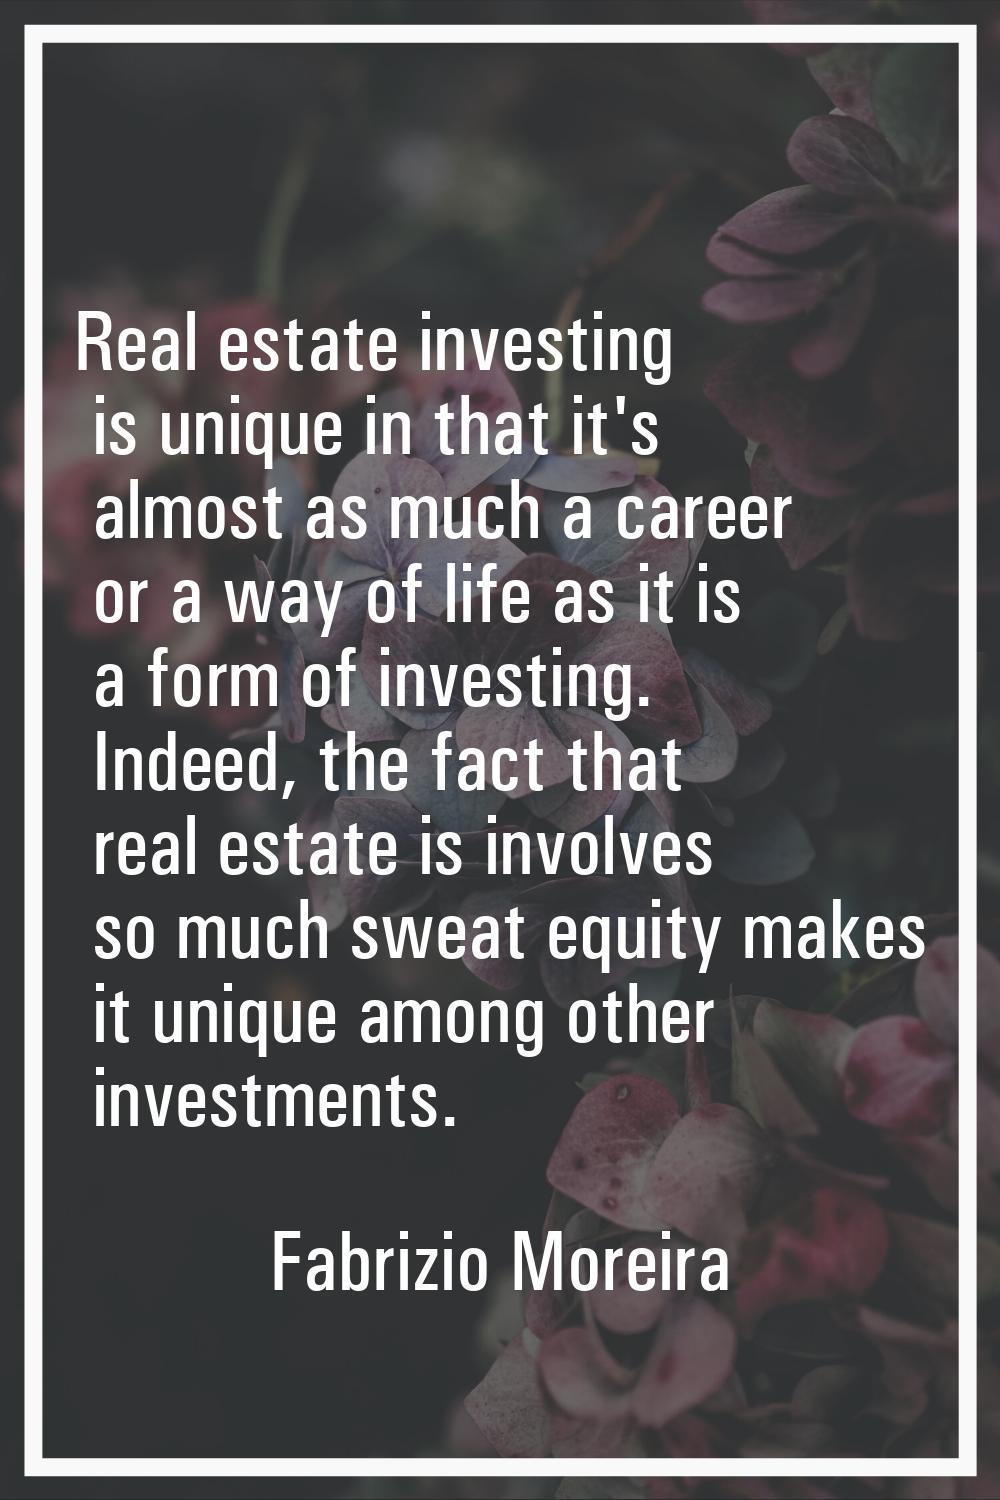 Real estate investing is unique in that it's almost as much a career or a way of life as it is a fo